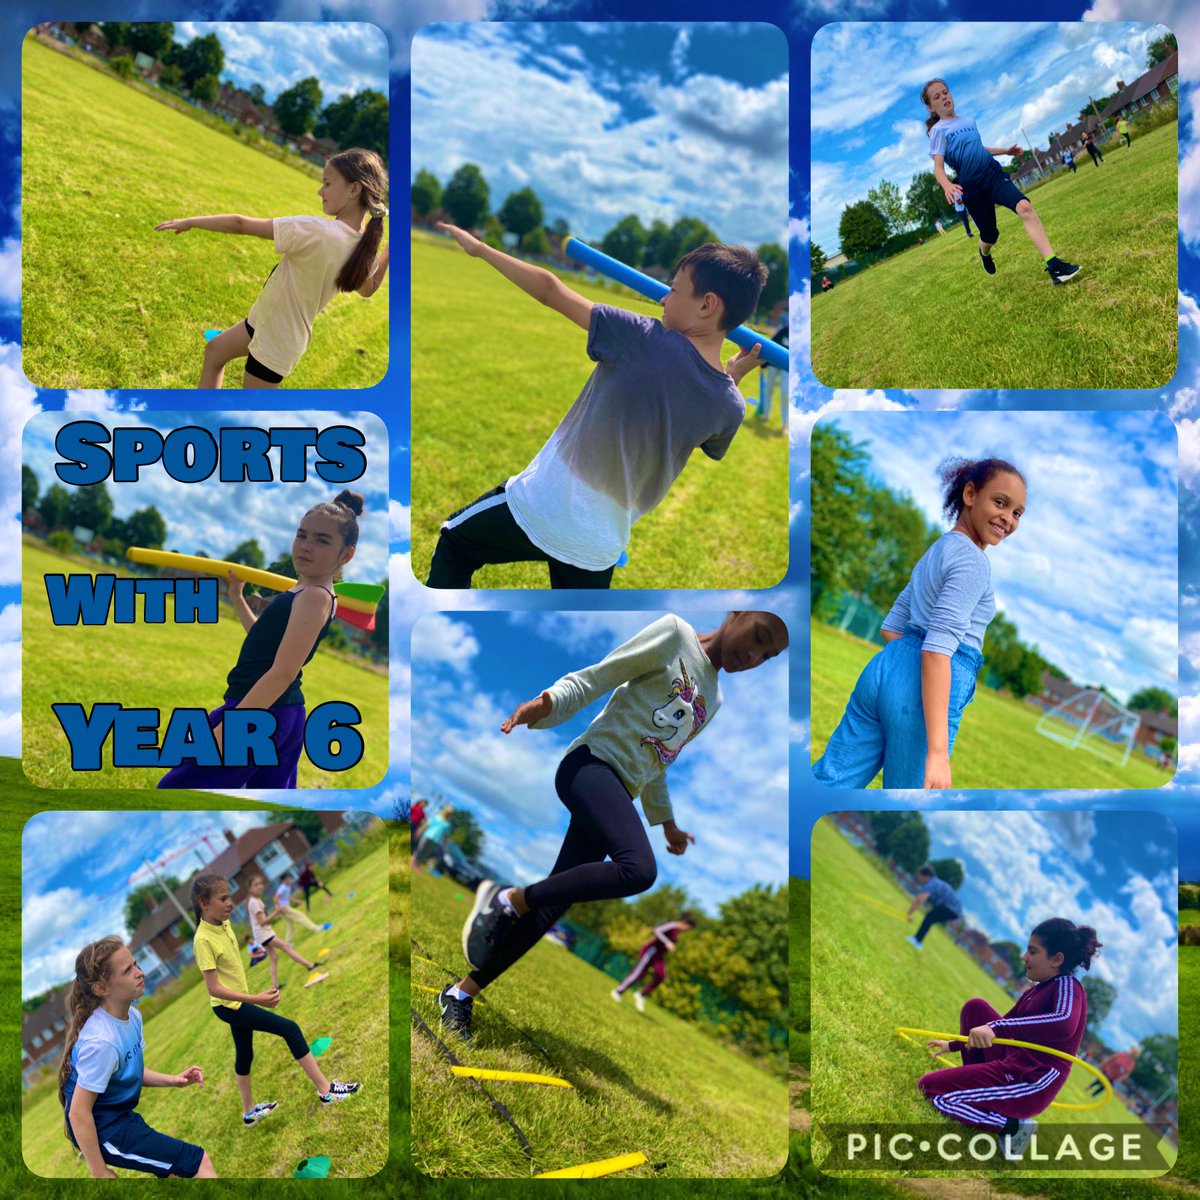 Sports with Year 6🏃‍♂️@lea_forest_aet @Lea_Forest_HT @lea_forest_dep @lea_forest_yr6 @AETAcademies @Cent_Stars @cent_coaching @physed @Physicaleduca17 @standingovsport @events_df @schoolsportsnl @schoolsportlive @SchoolSports_SA #PhysicalEducation #Sports #Outdoors #SchoolSports